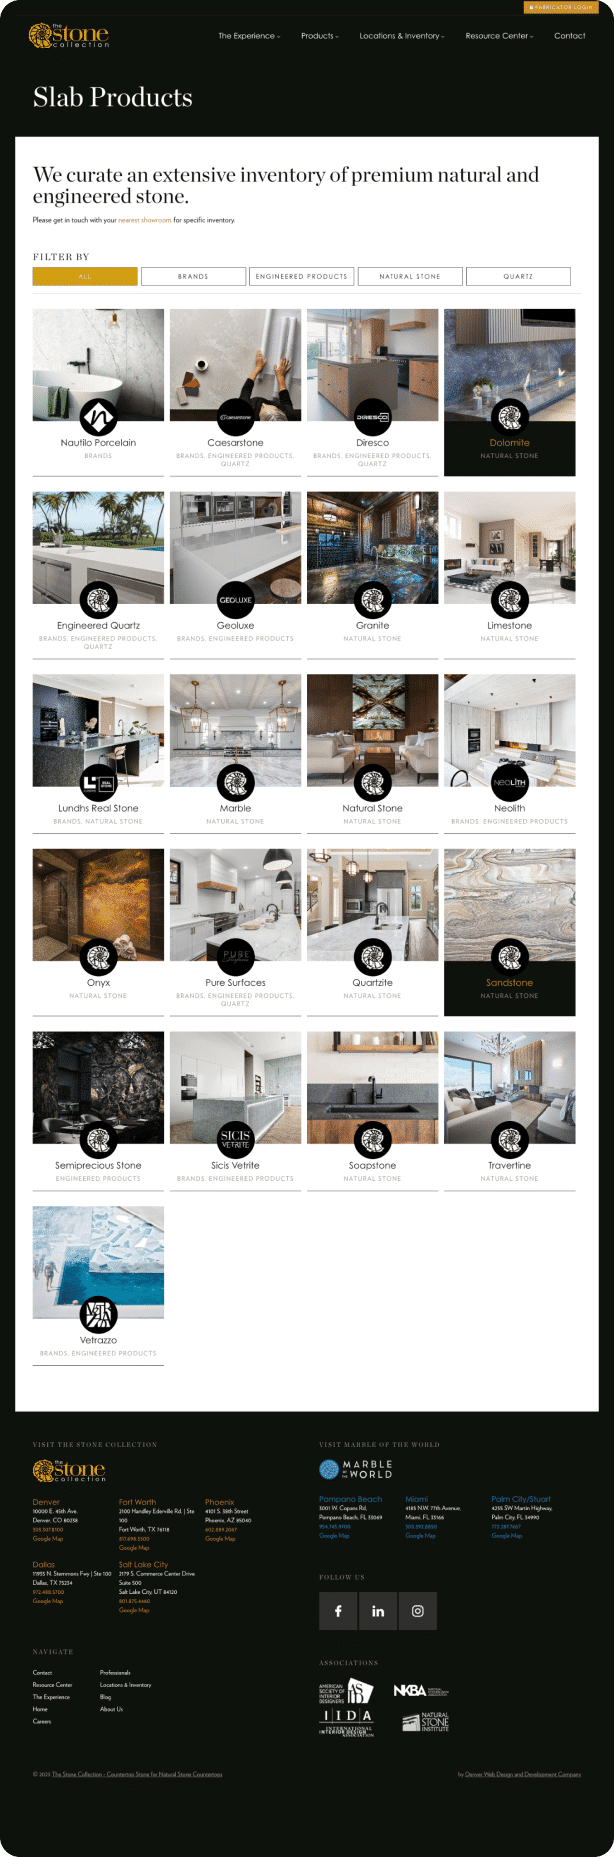 The Stone Collection | Webolutions Digital Marketing Agency